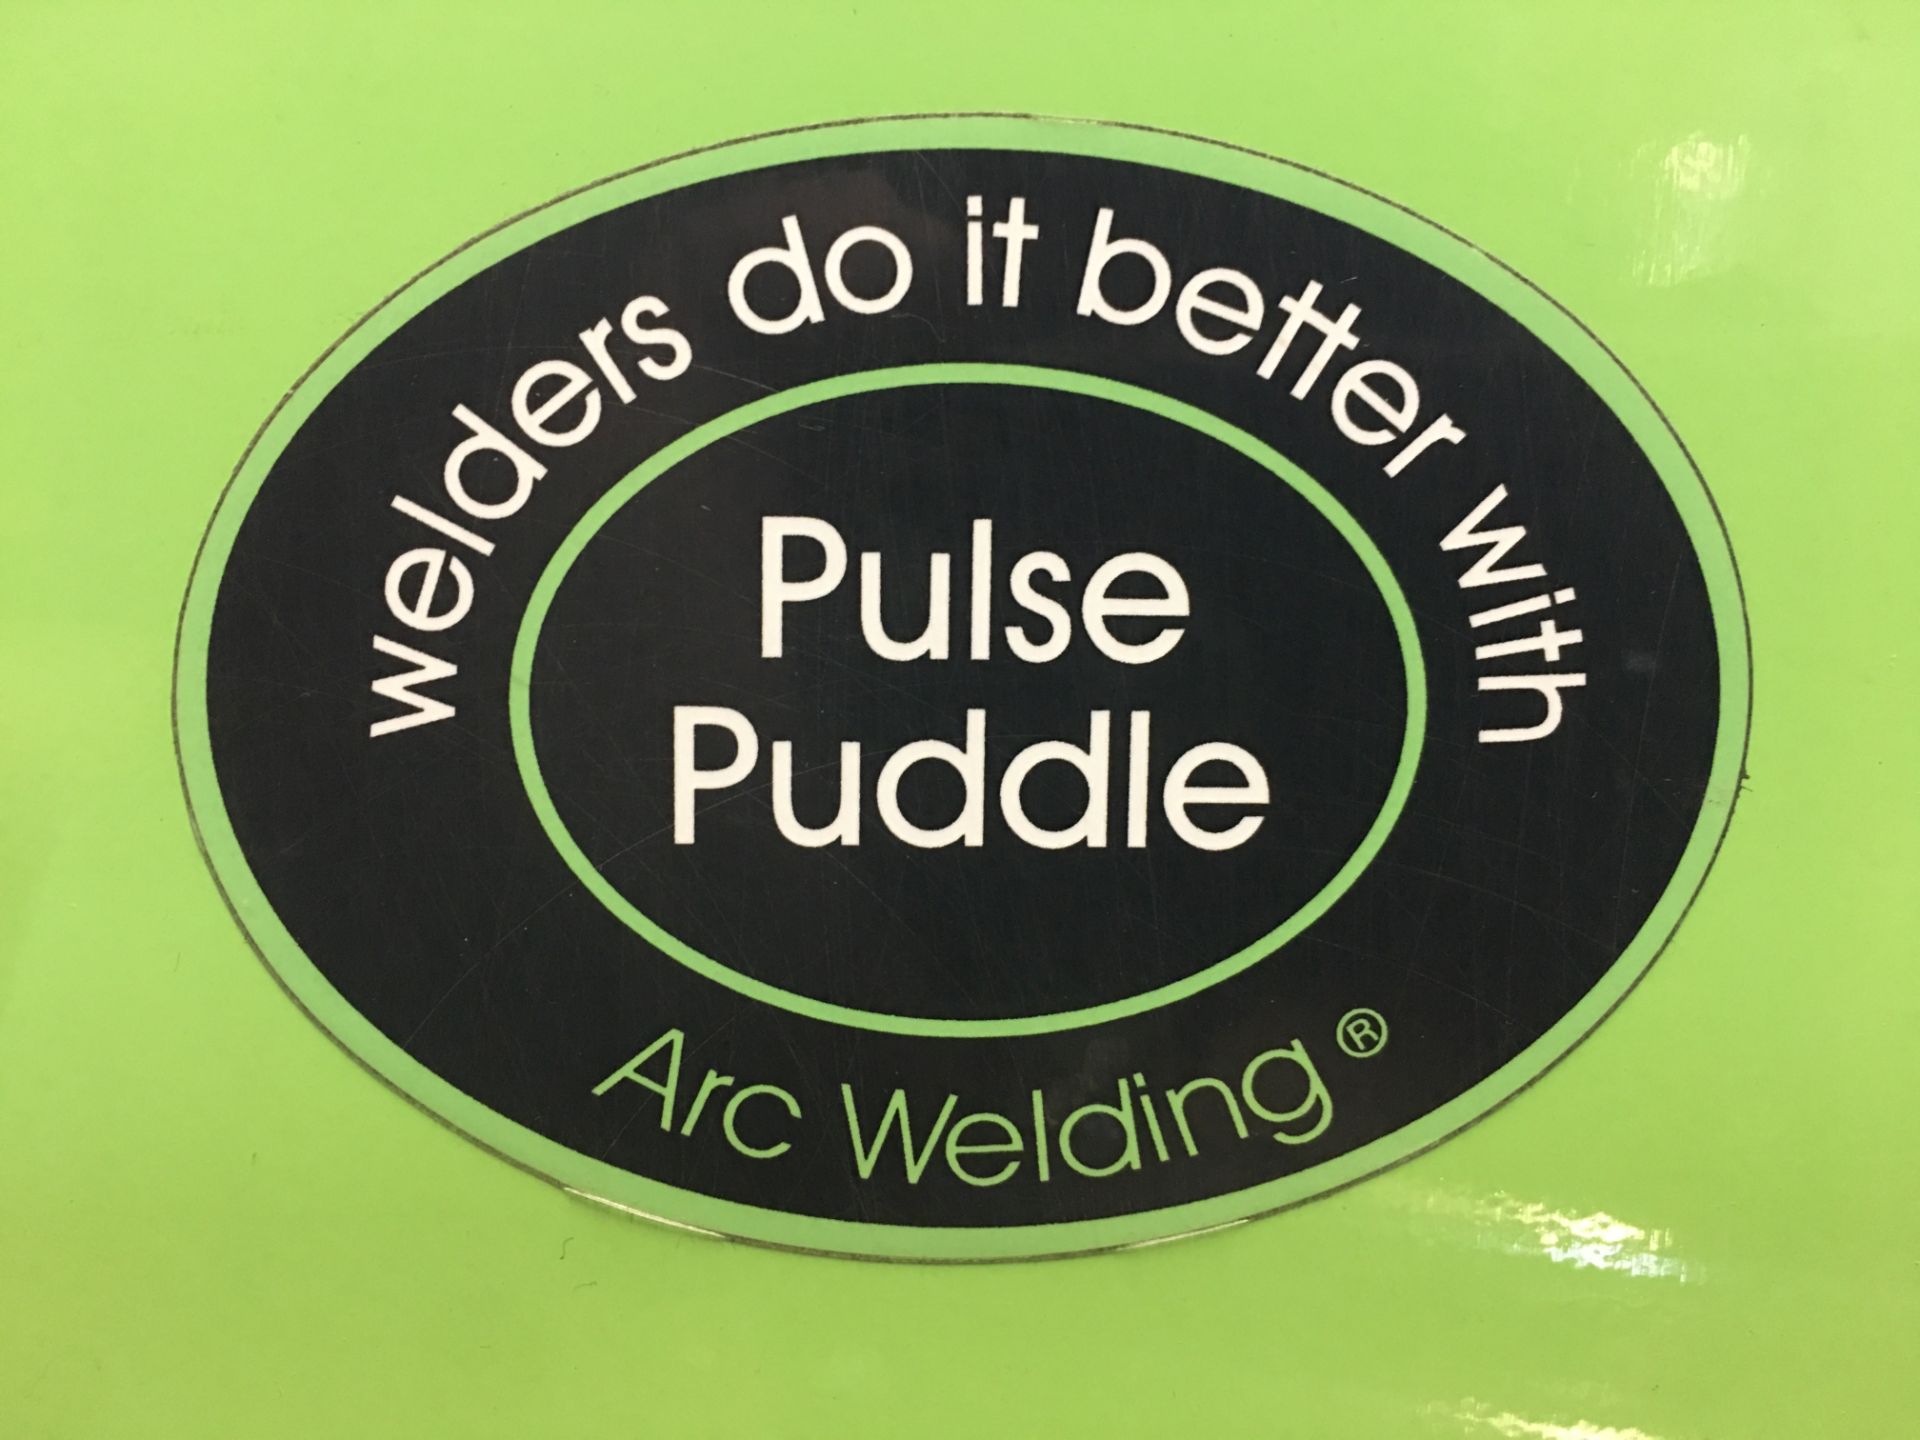 Bonal Pulse Puddle Arc Welding Stress Reliever - Image 3 of 3